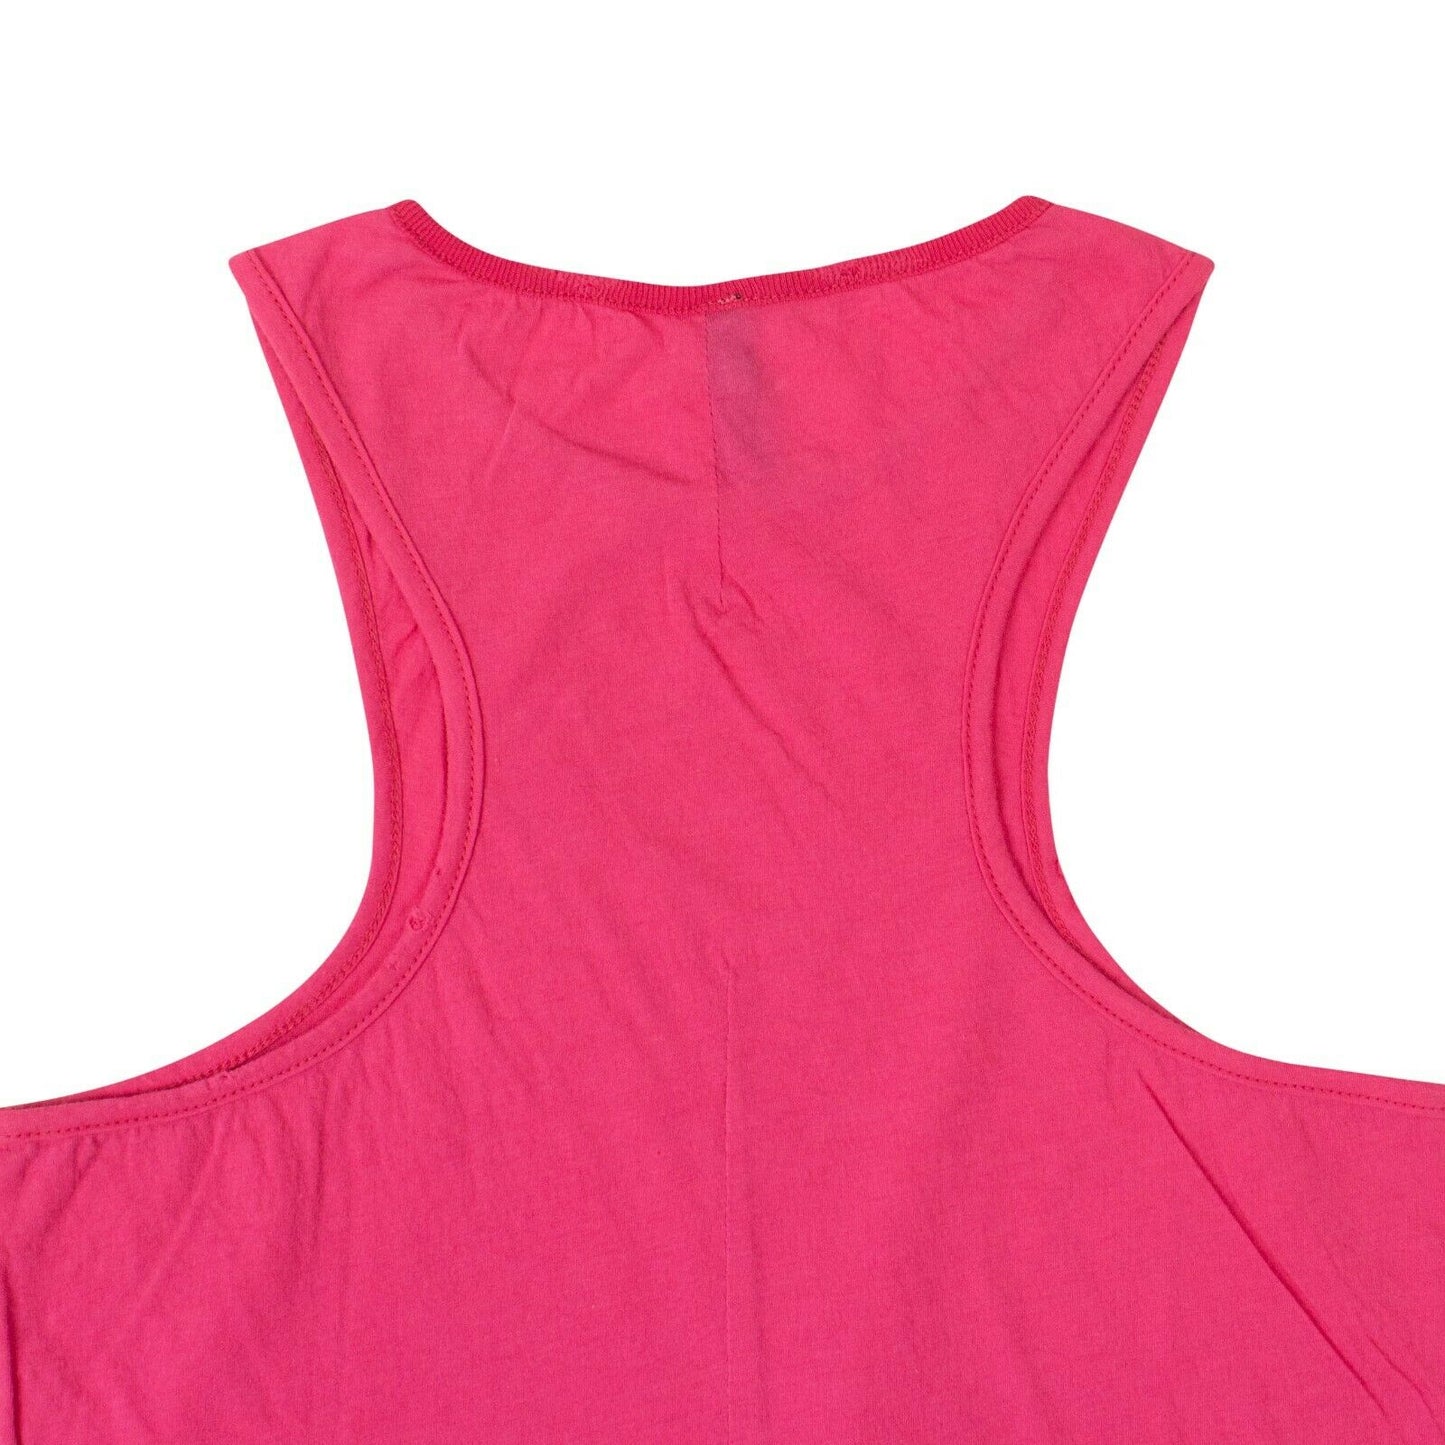 Unravel Project Tank Top - Pink